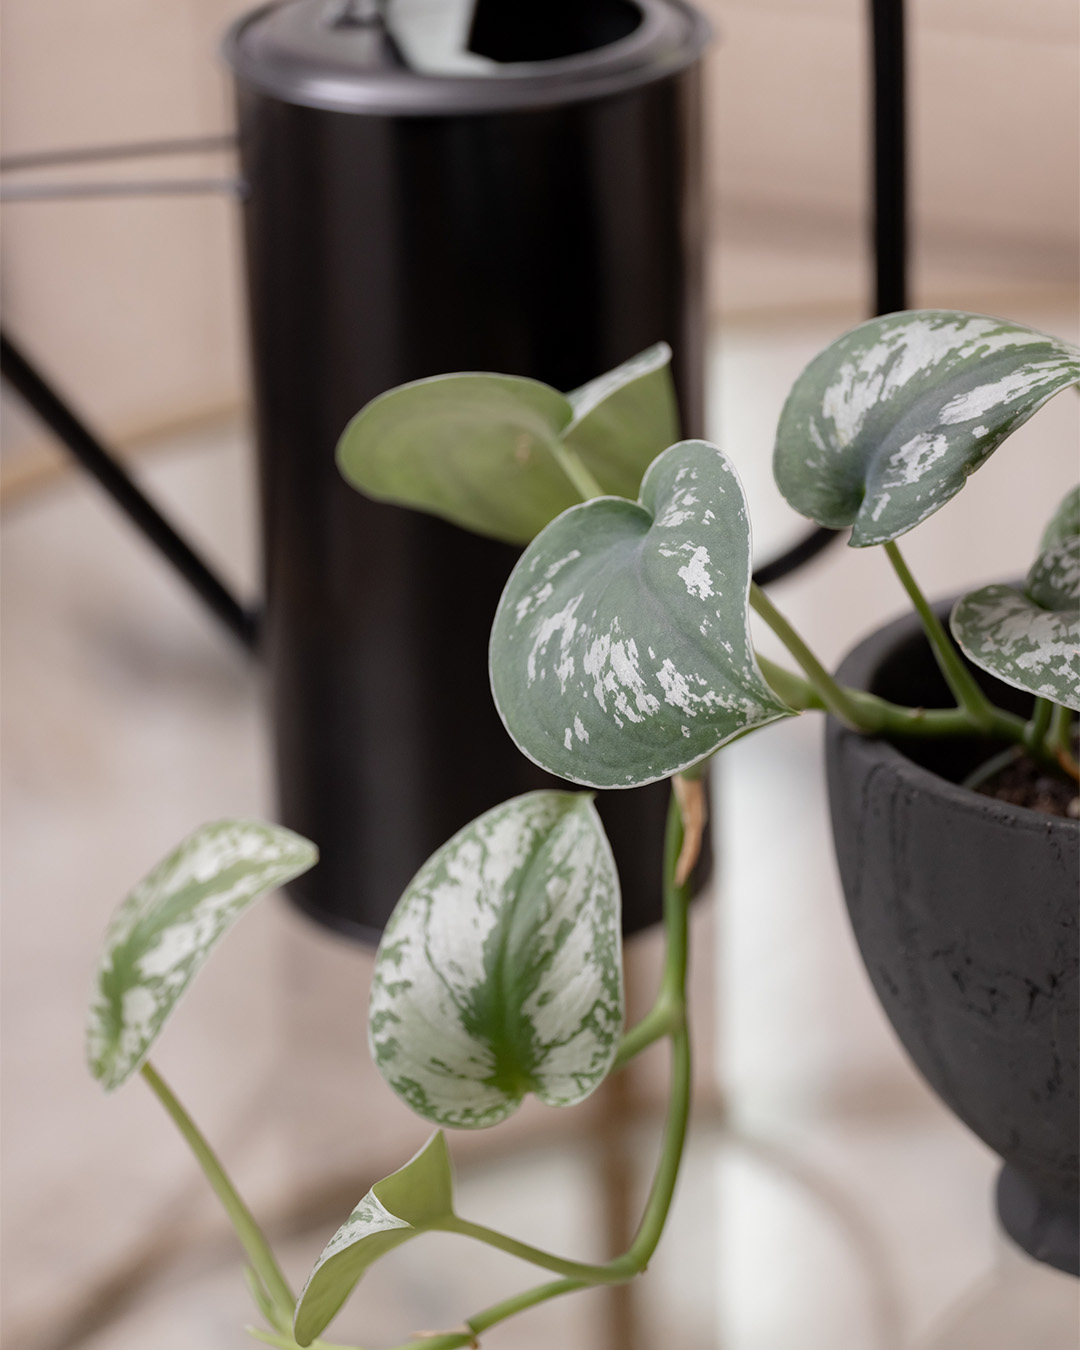 These particular houseplants are much coveted by home decor enthusiasts because of their beautiful color and graceful growing pattern. They also happen to be deceptively easy to care for, despite how exotic they look. Here's how to grow a silver satin pothos plant!